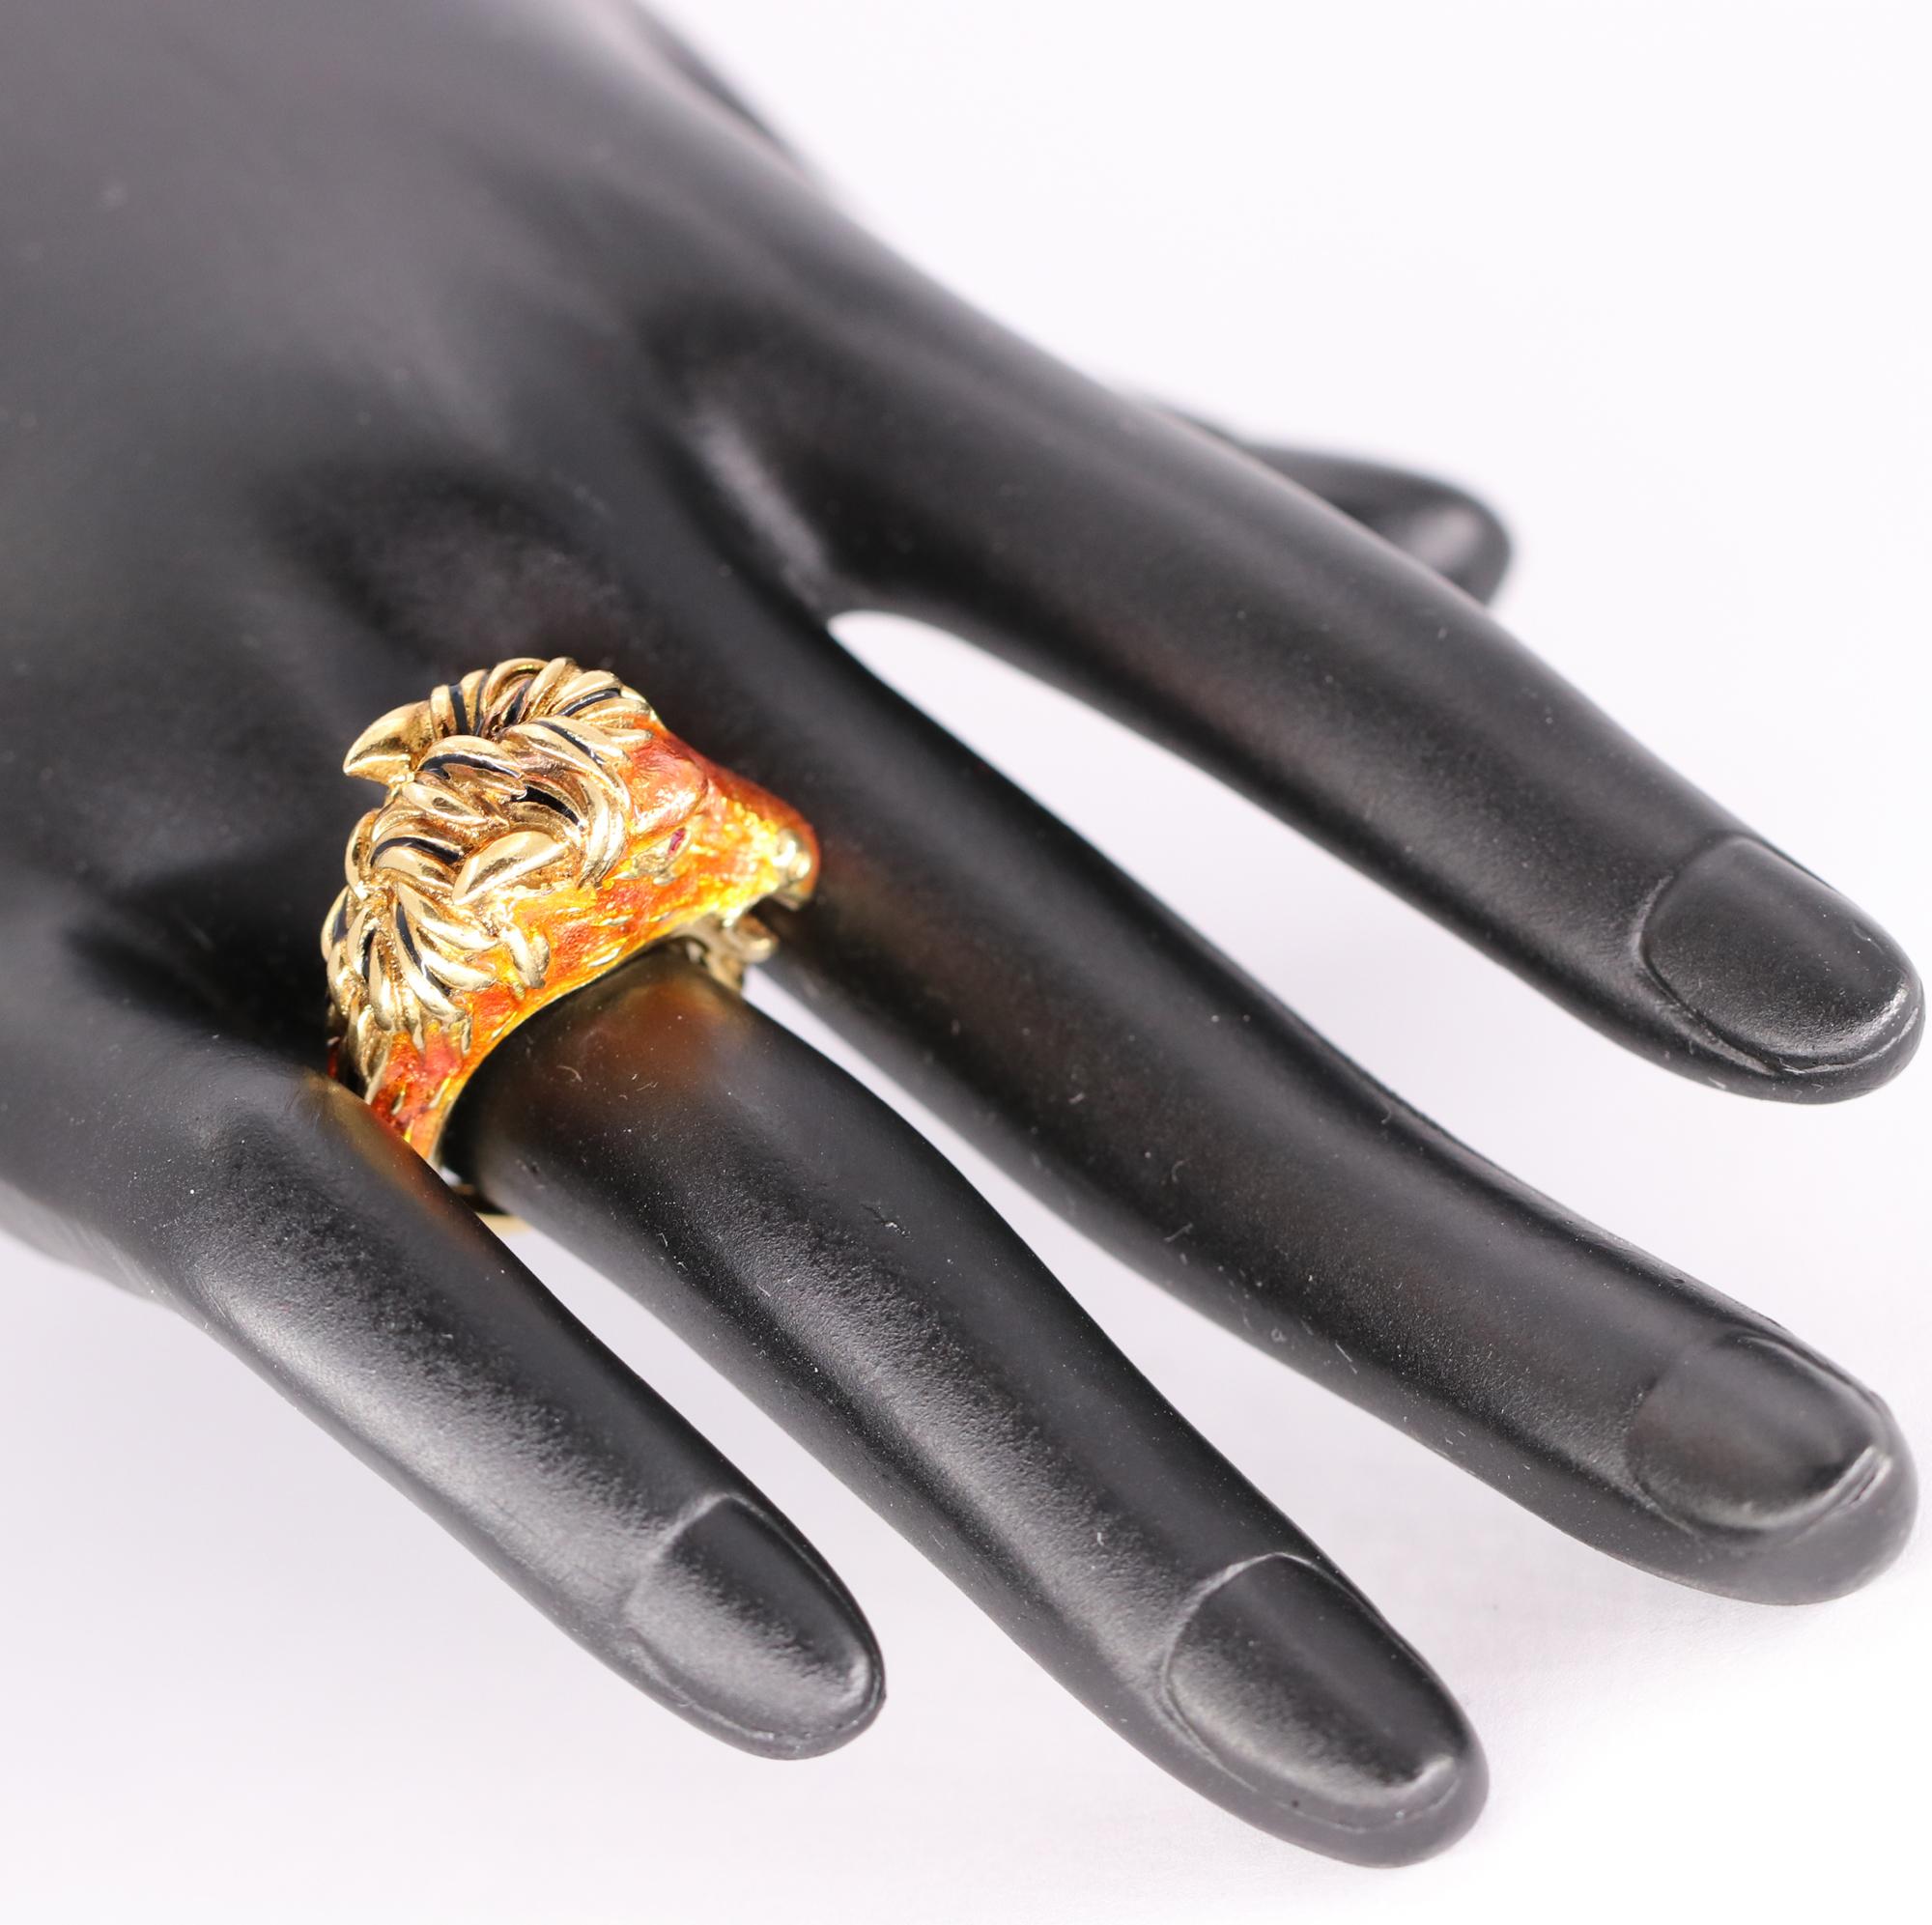 An 18K yellow gold ring with the power and design of a stallion, complete with a flowing gold mane and tail with black enamel accent. The face is a bright copper colored enamel with ruby eyes. Designed by Frascarolo of San Remo Italy, in the mid